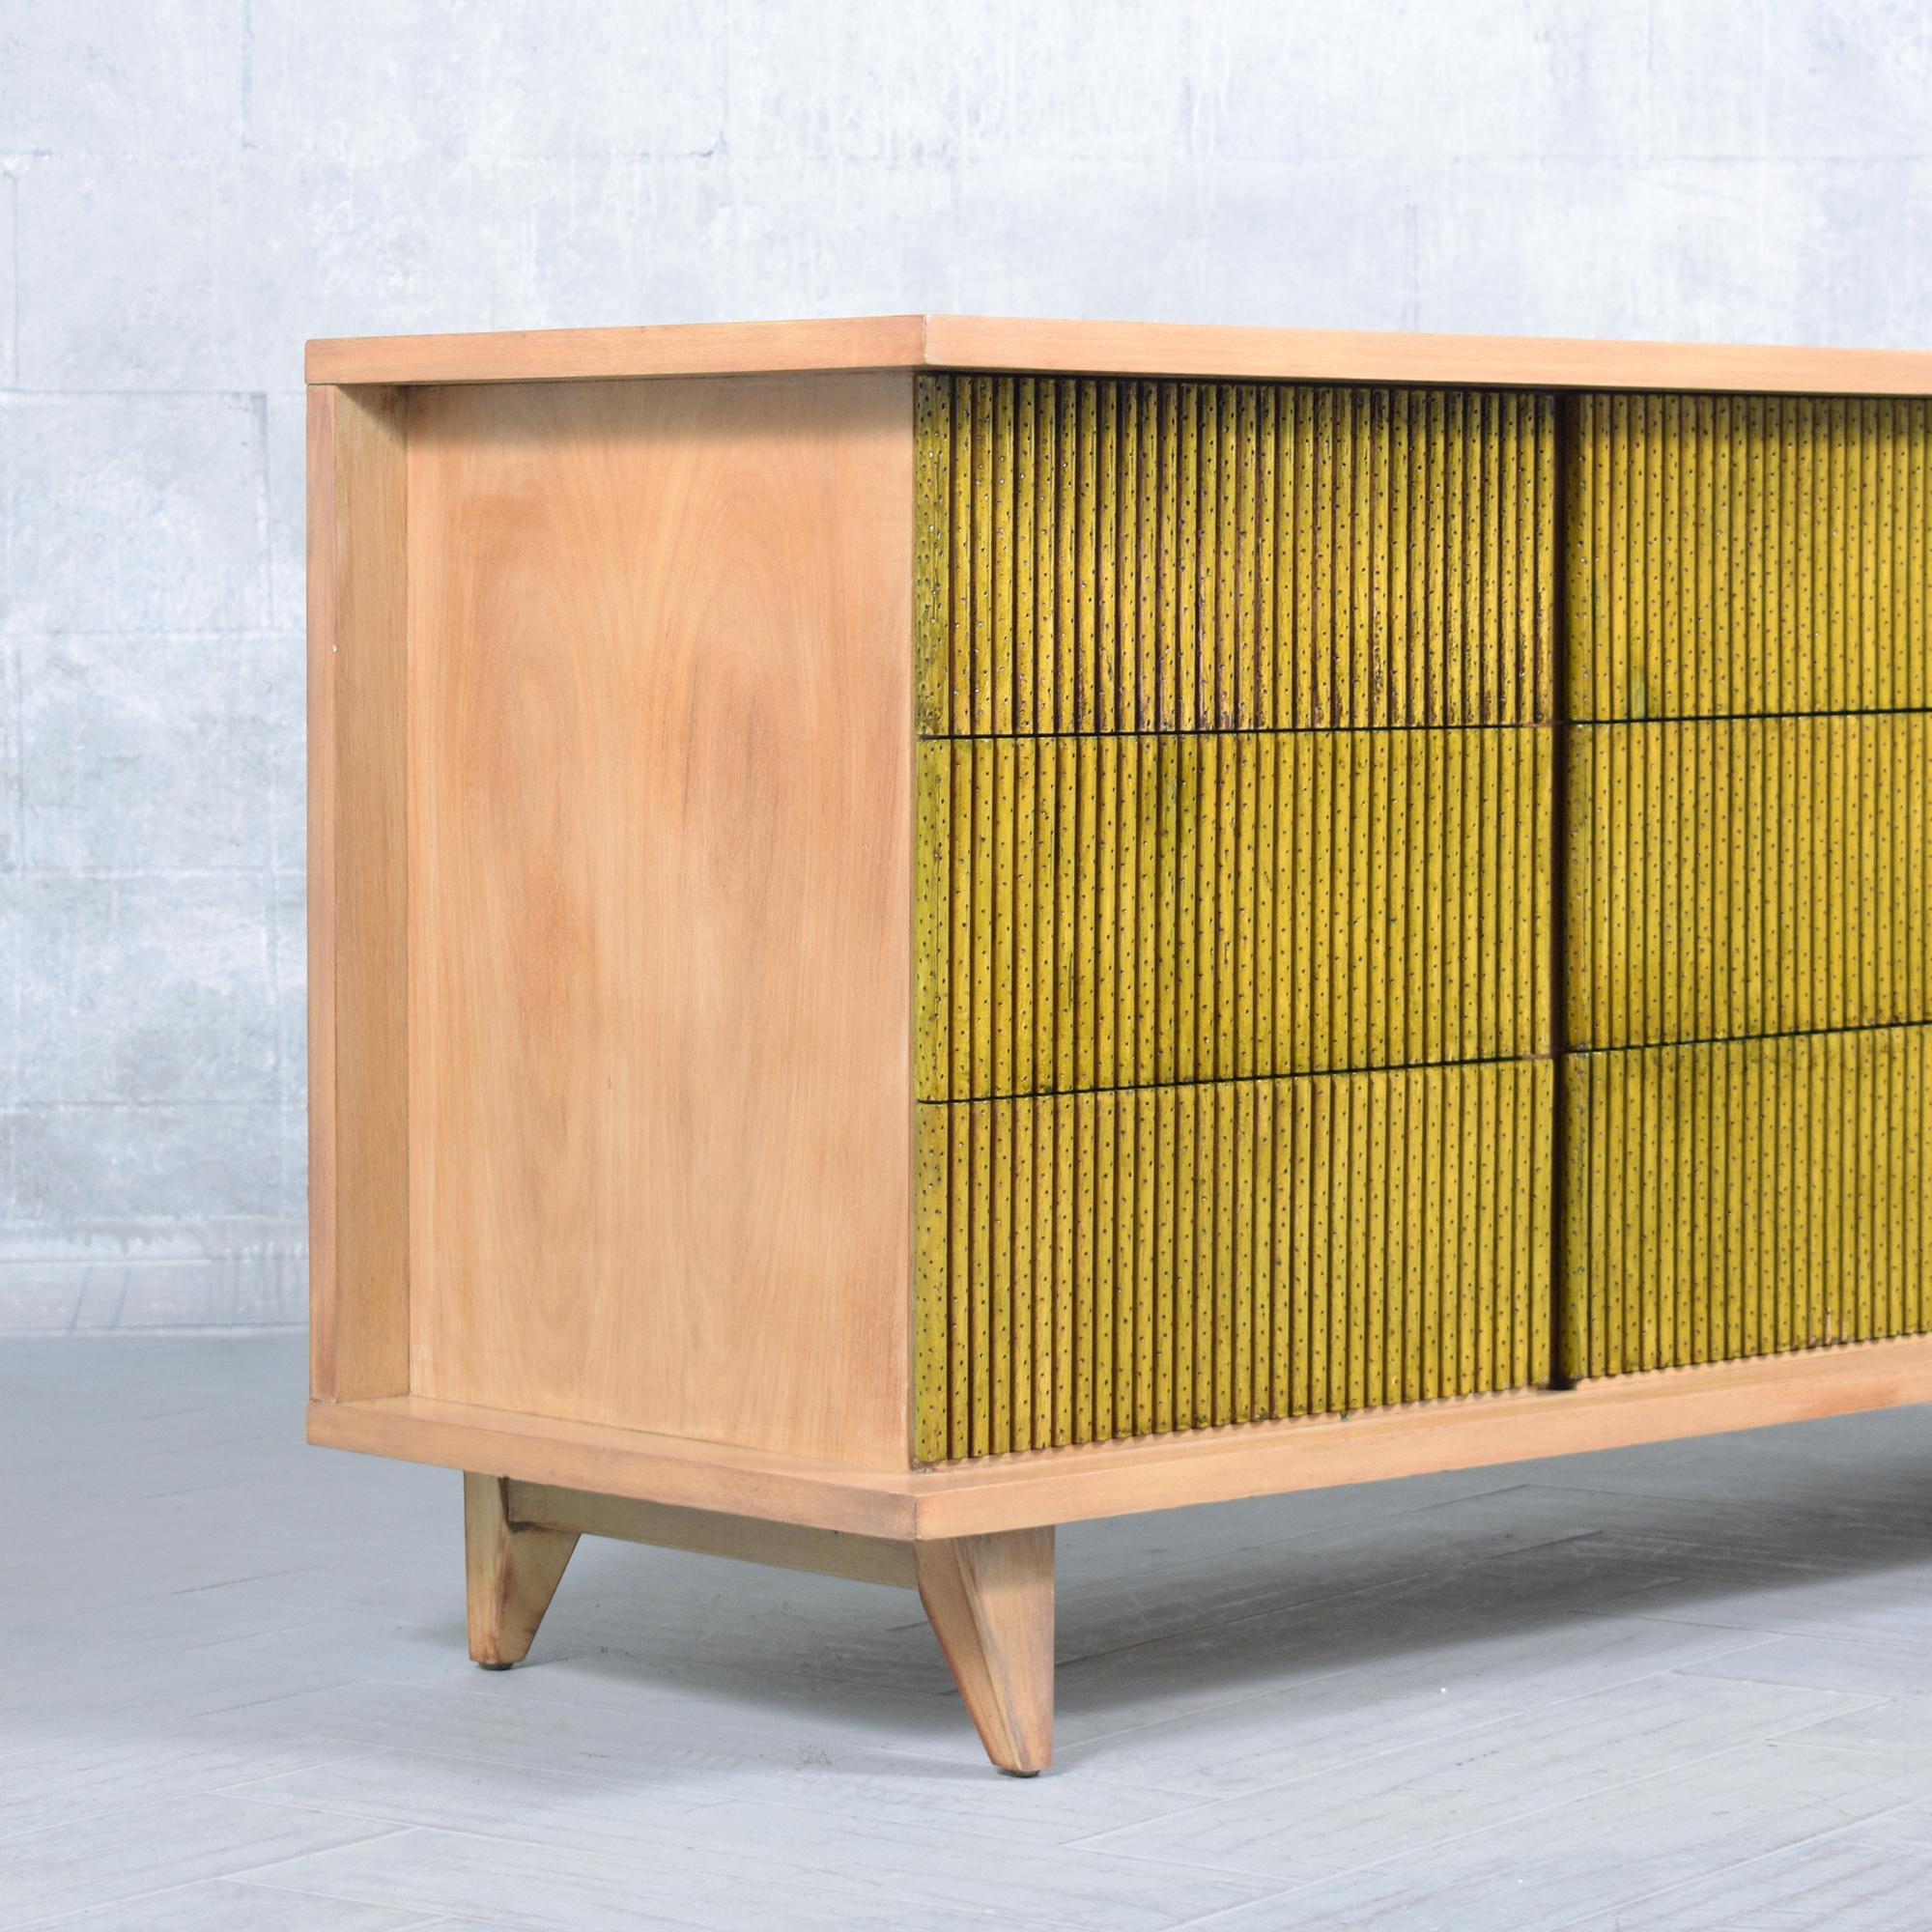 American 1960s Walnut Mid-Century Organic Modern Chest of Drawers: Handcrafted & Restored For Sale